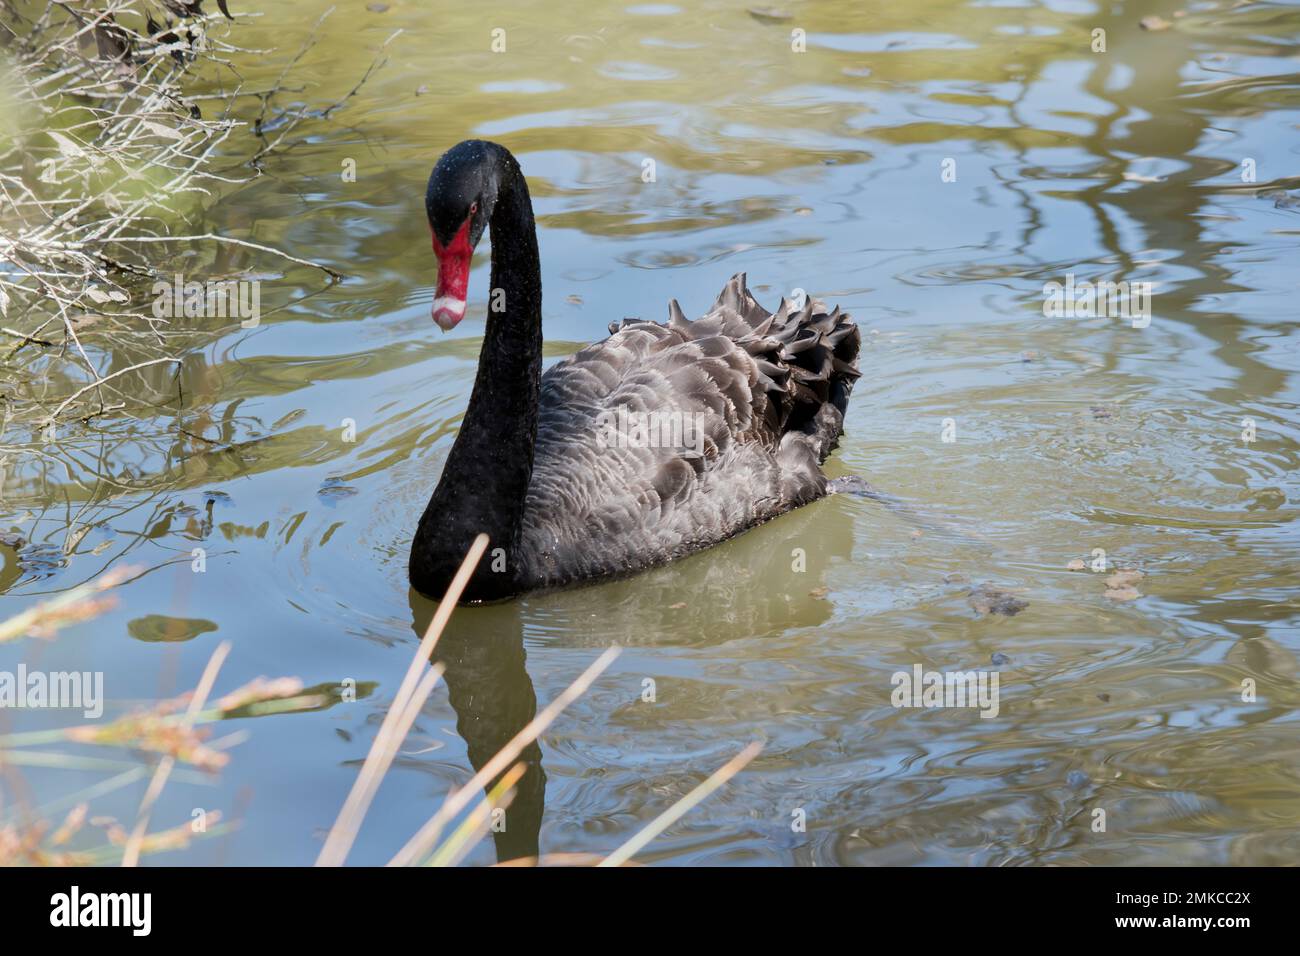 the black swan is an all black waterbird with a red bill with a white stripe and red eyes Stock Photo